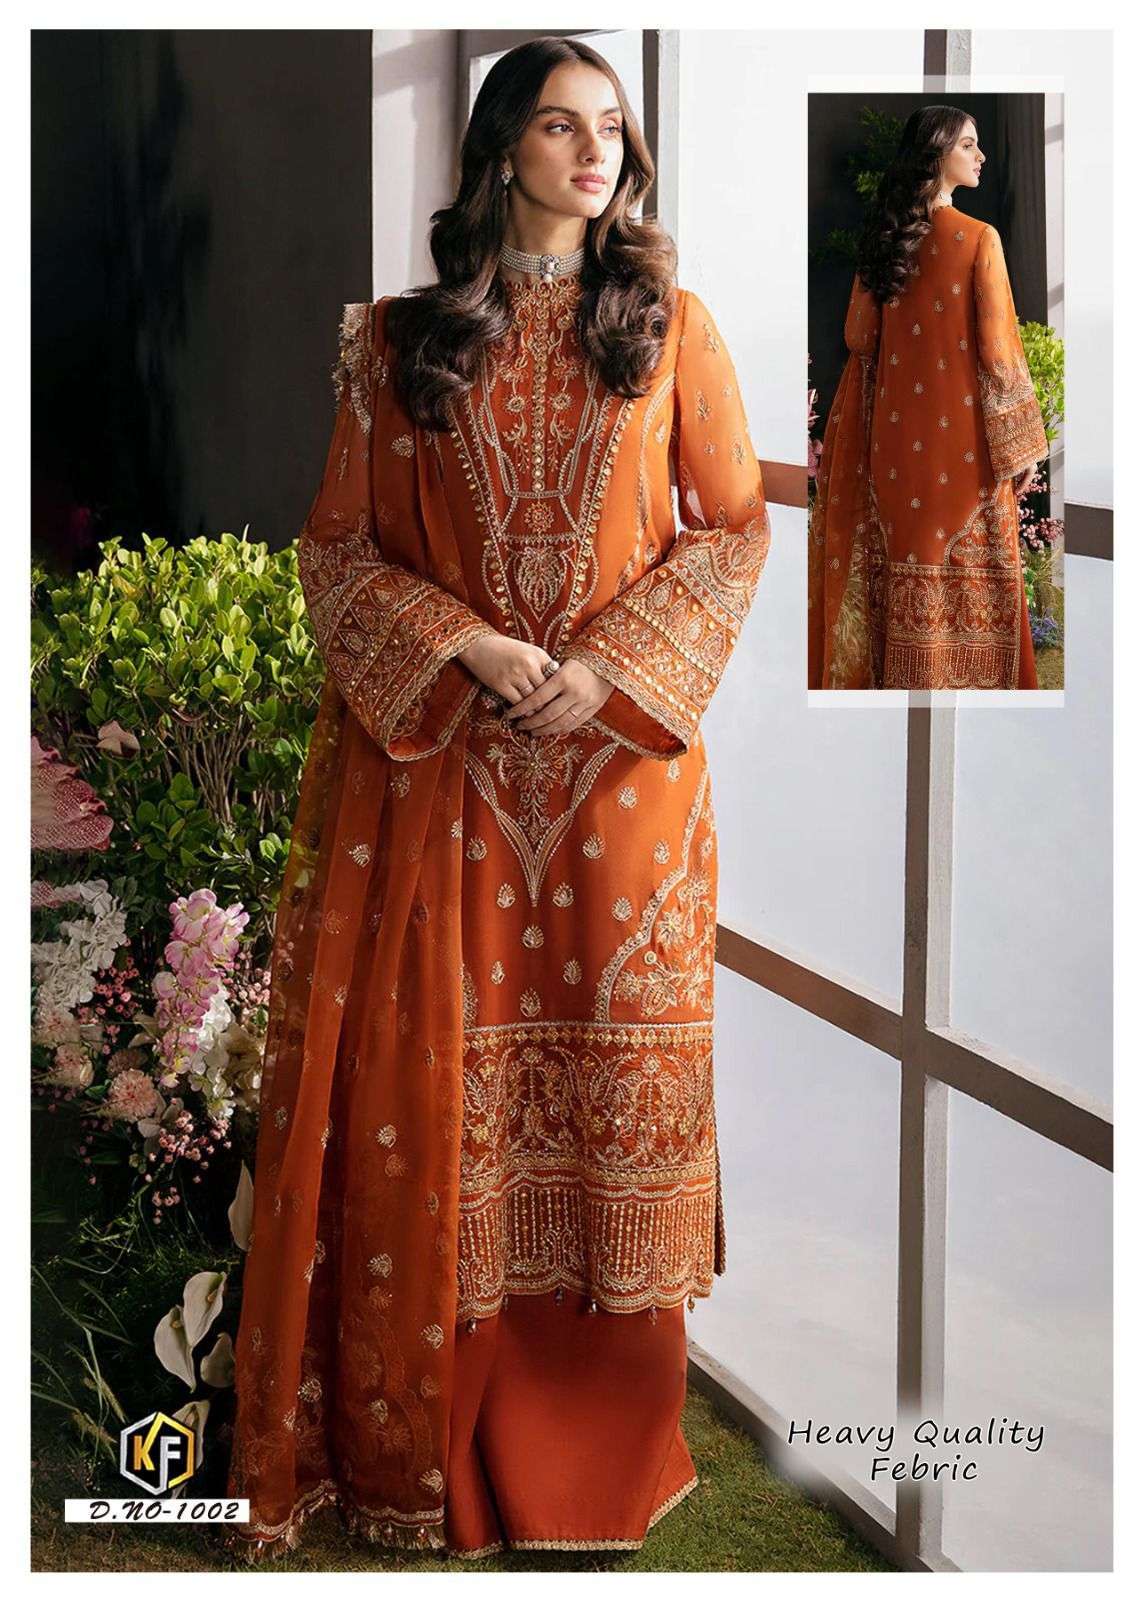 PakeezaAnchal - Salwar Suit Designs Latest Cotton Punjabi Salwar Suit. Find  the latest and trendy design on our YouTube Channel:  https://www.youtube.com/watch?v=nGS0tFyWvxA | Facebook